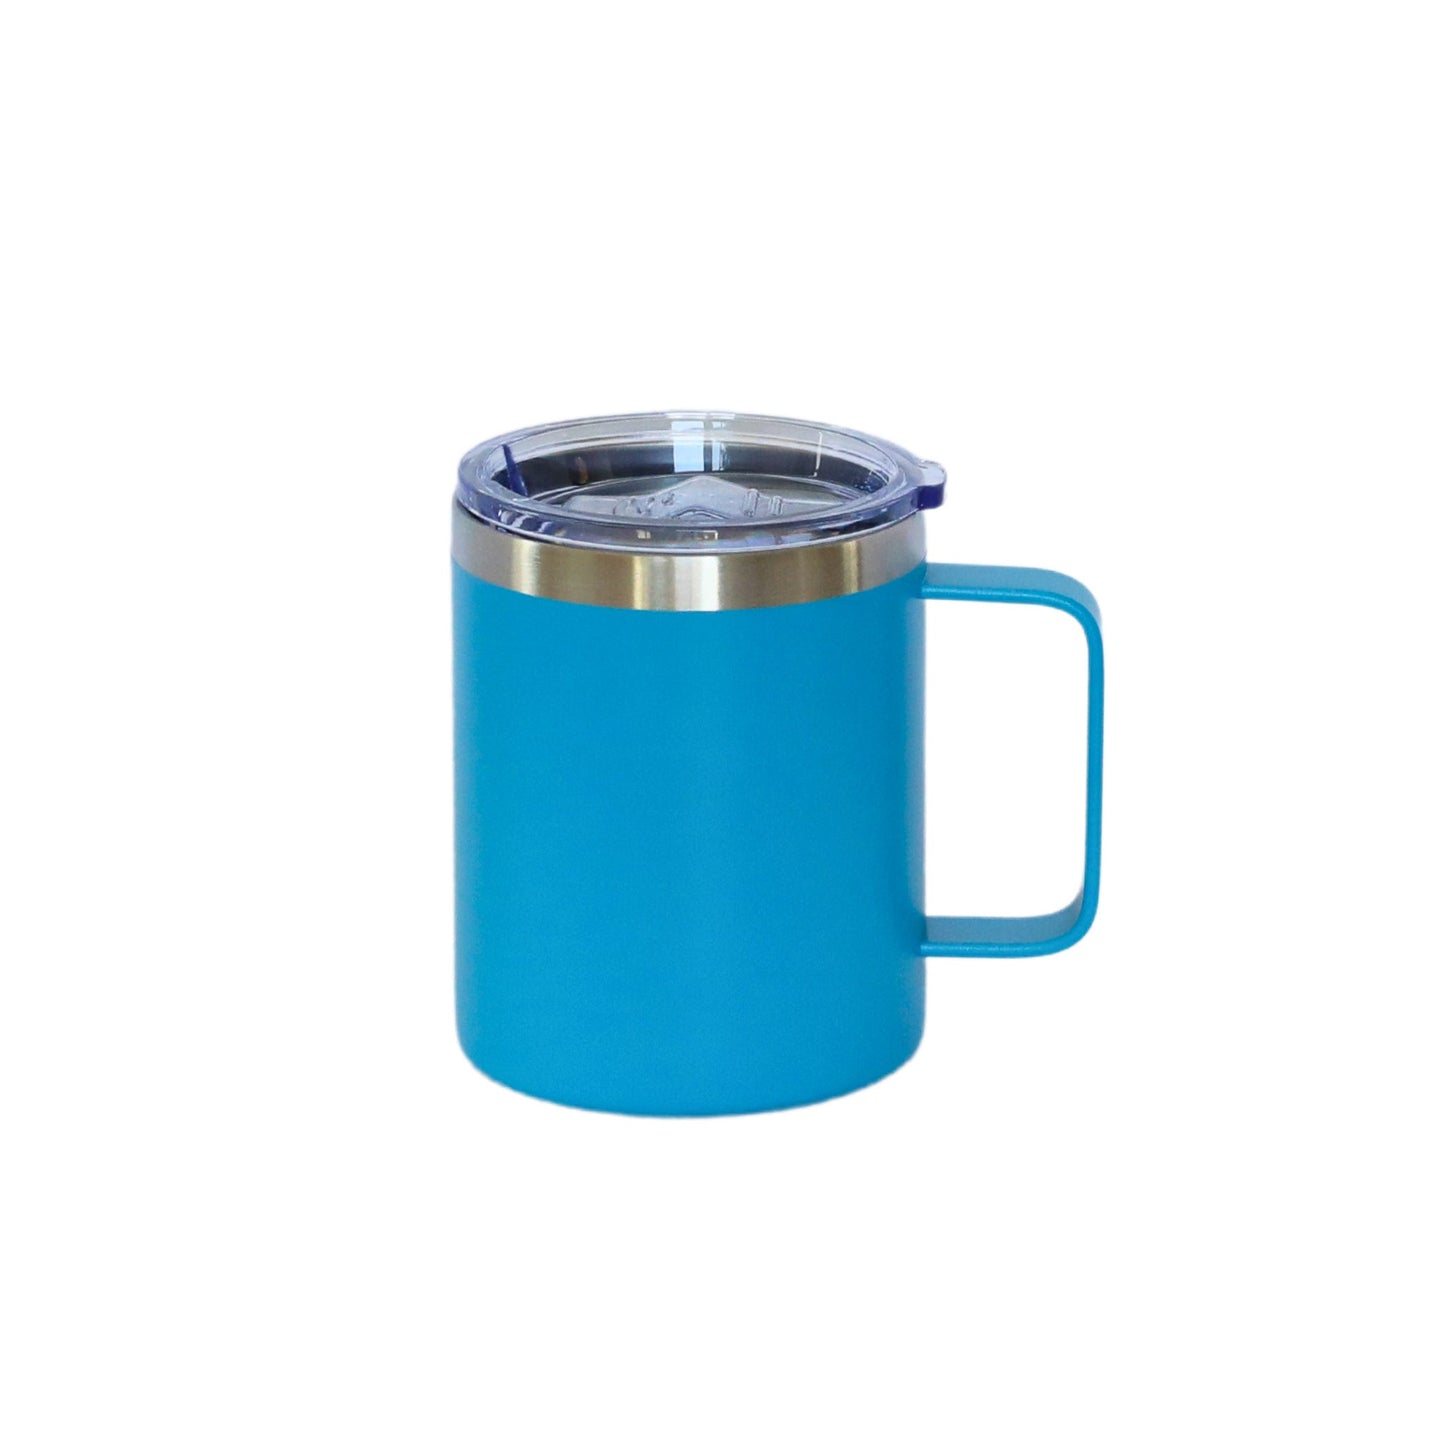 12 Oz Stainless Steel Travel Mug with Handle - Blue by Creative Gifts